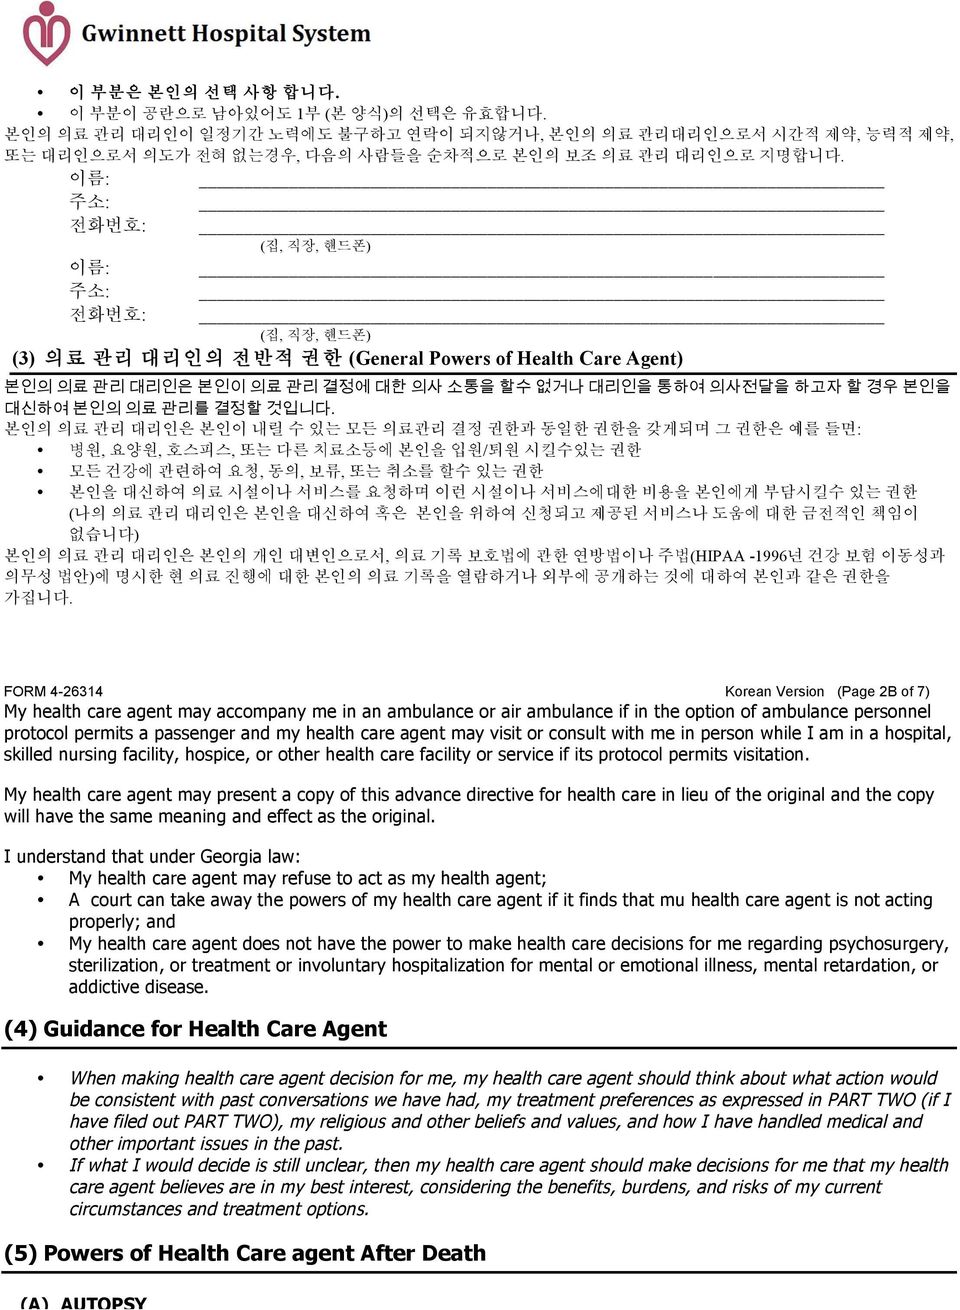 FORM 4-26314 Korean Version (Page 2B of 7) My health care agent may accompany me in an ambulance or air ambulance if in the option of ambulance personnel protocol permits a passenger and my health